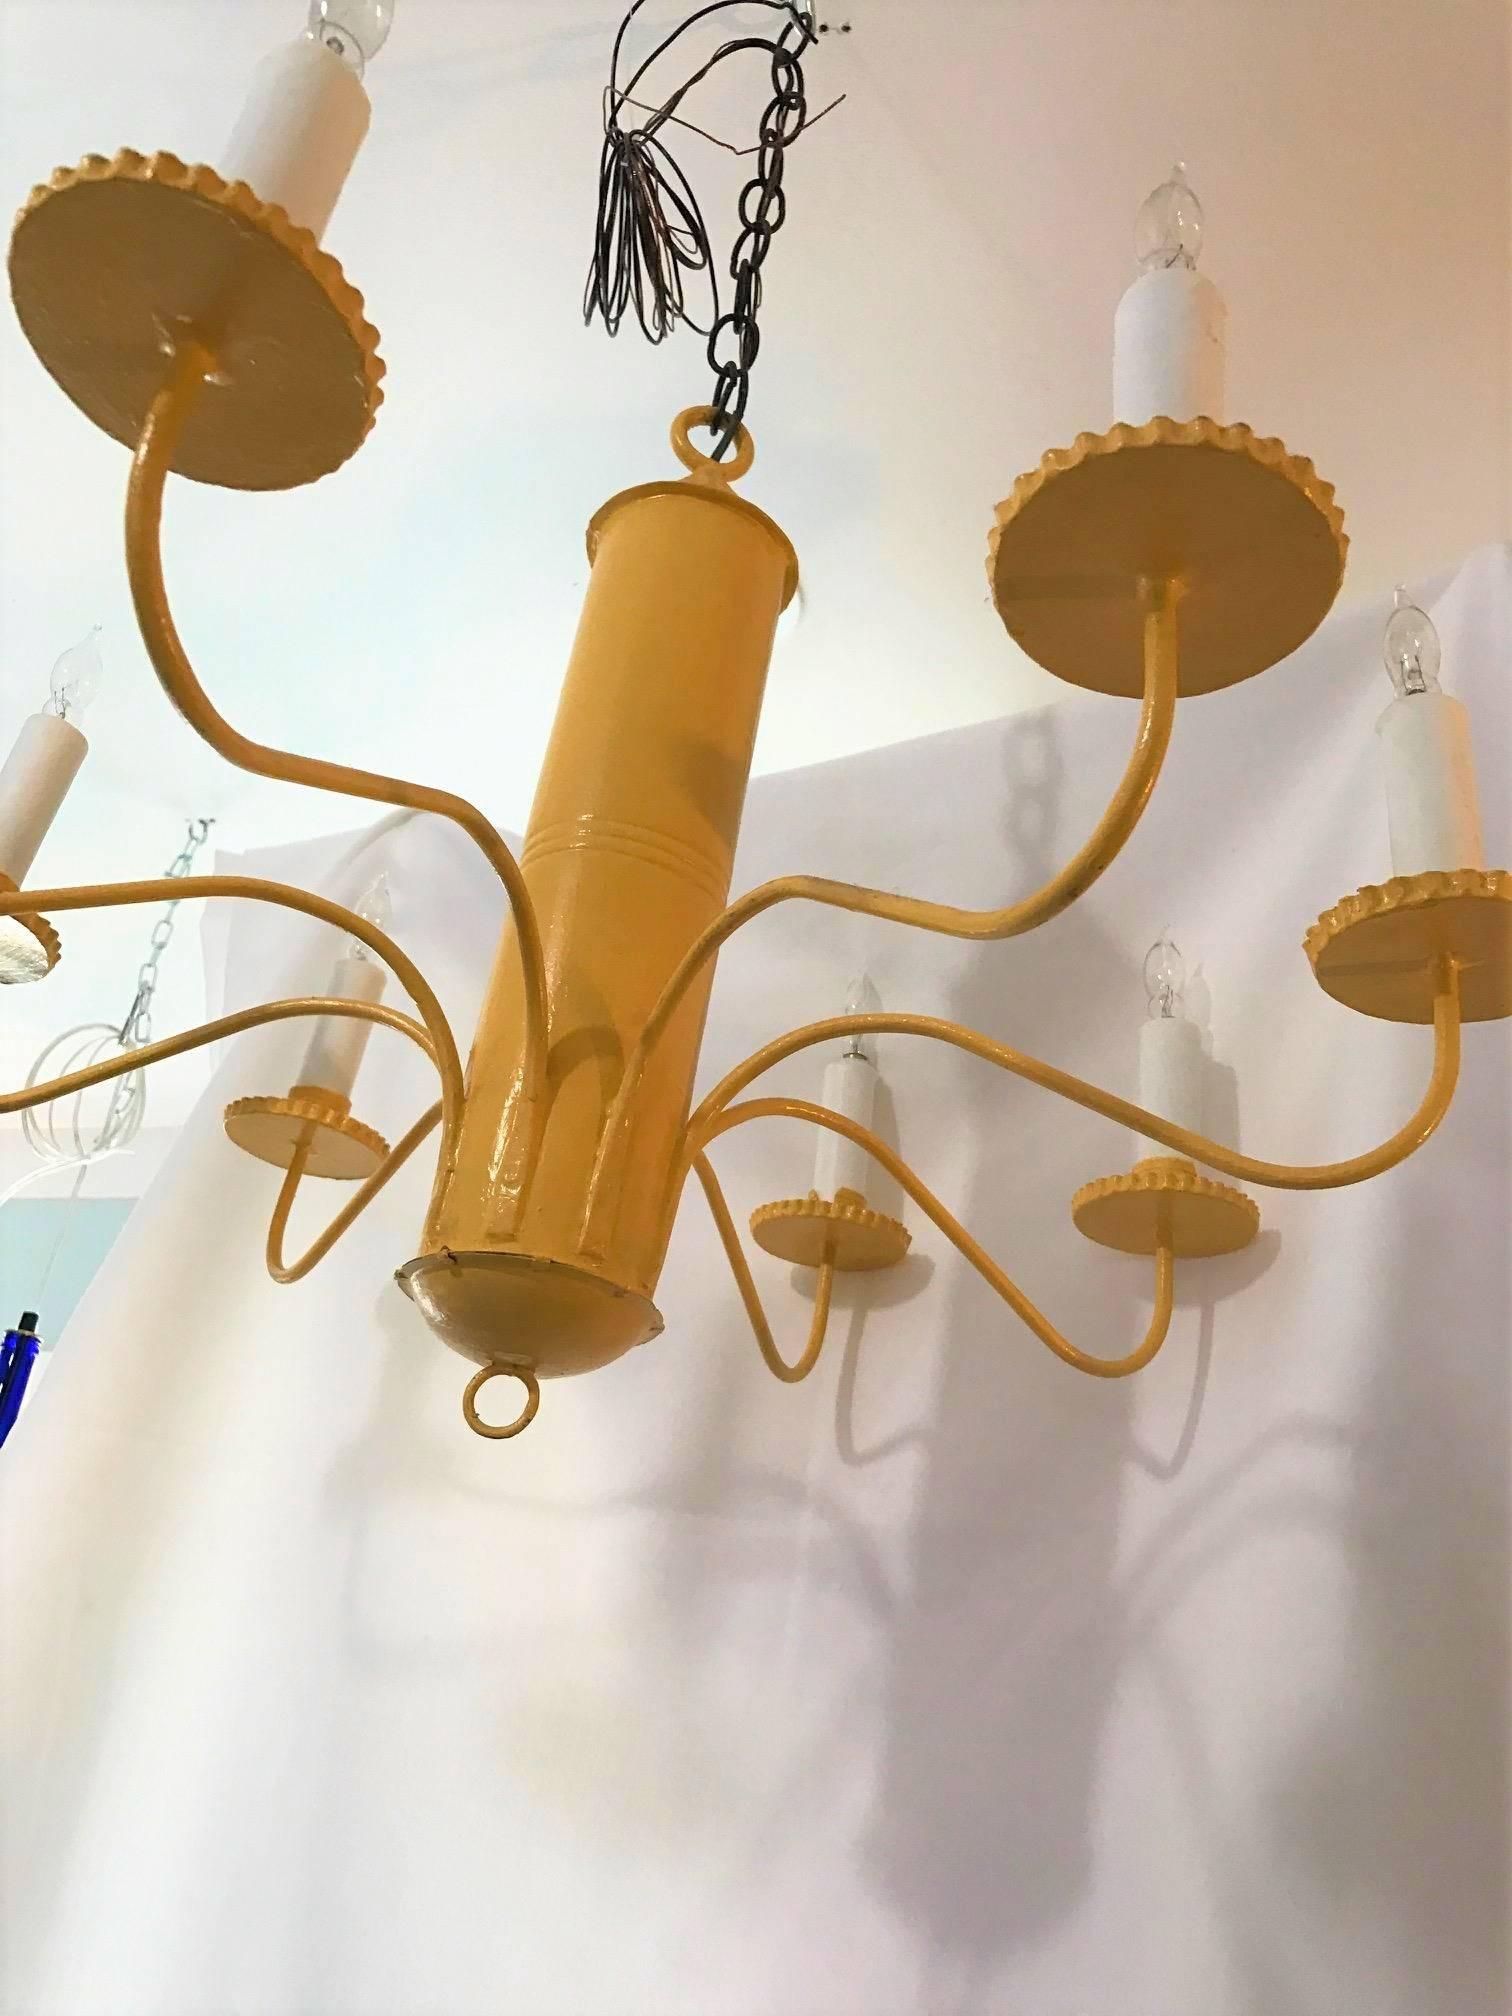 American ON SALE NOW! ON SALE NOW! Hand-Forged Buttercup Yellow Barrel Chandelier